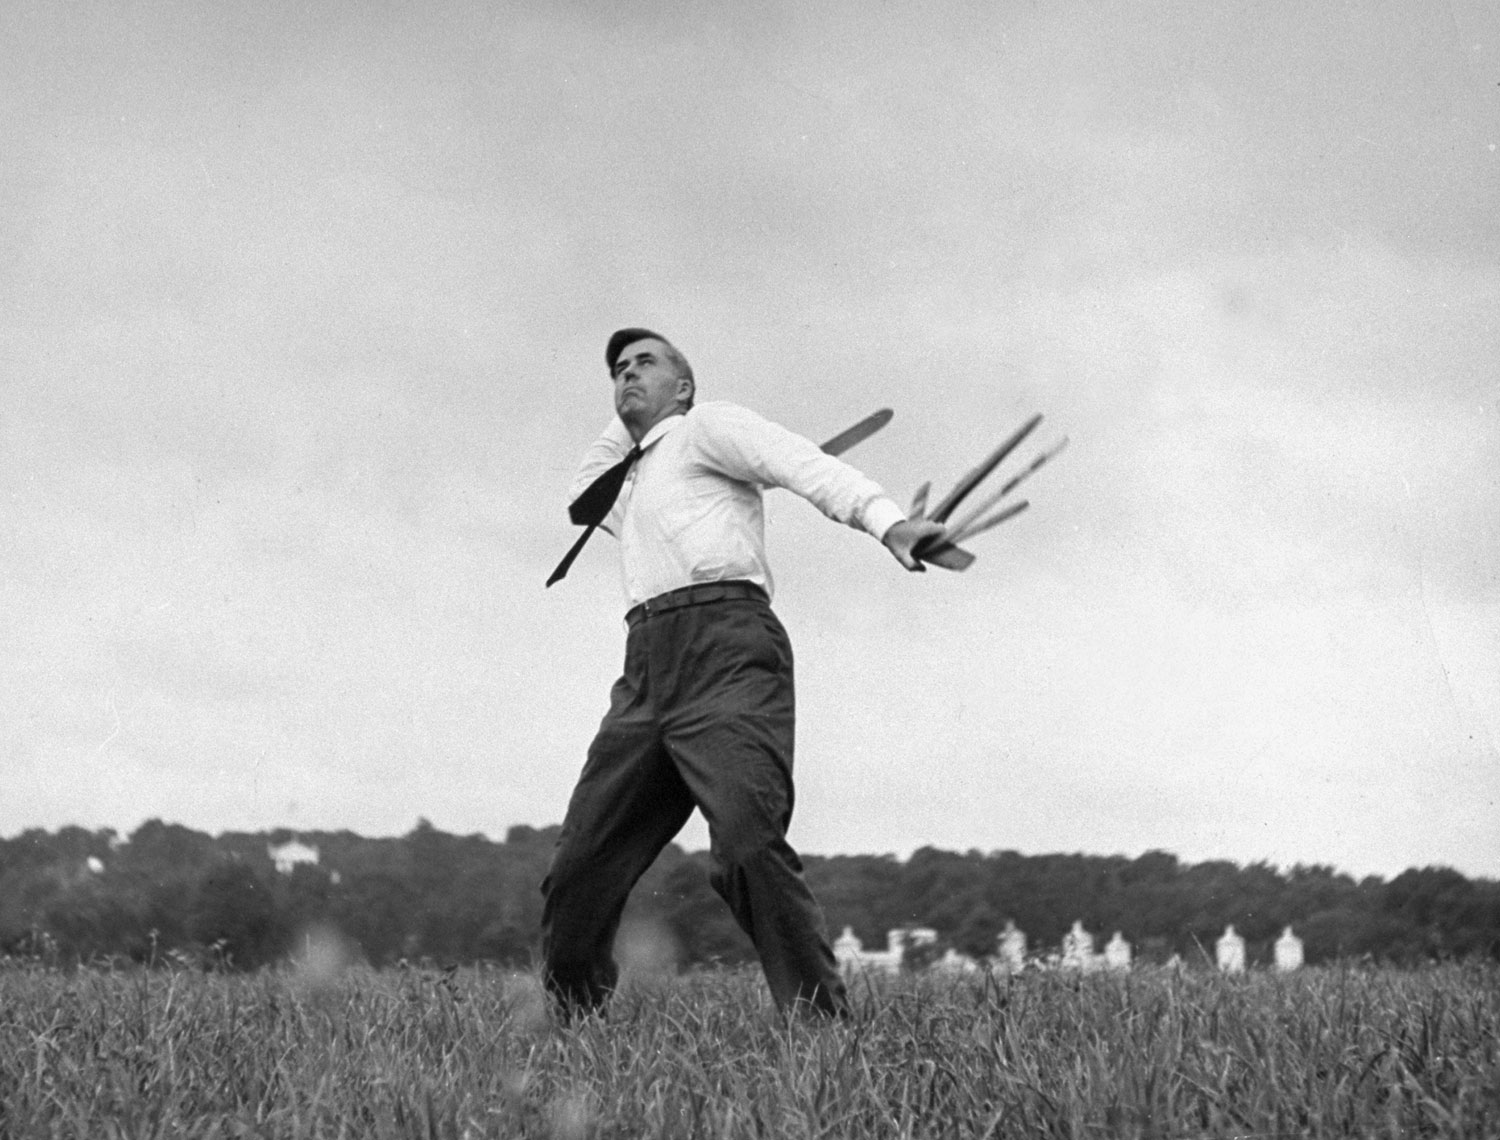 Vice Presidential candidate Henry A. Wallace throws a boomerang in a field in January 1940.